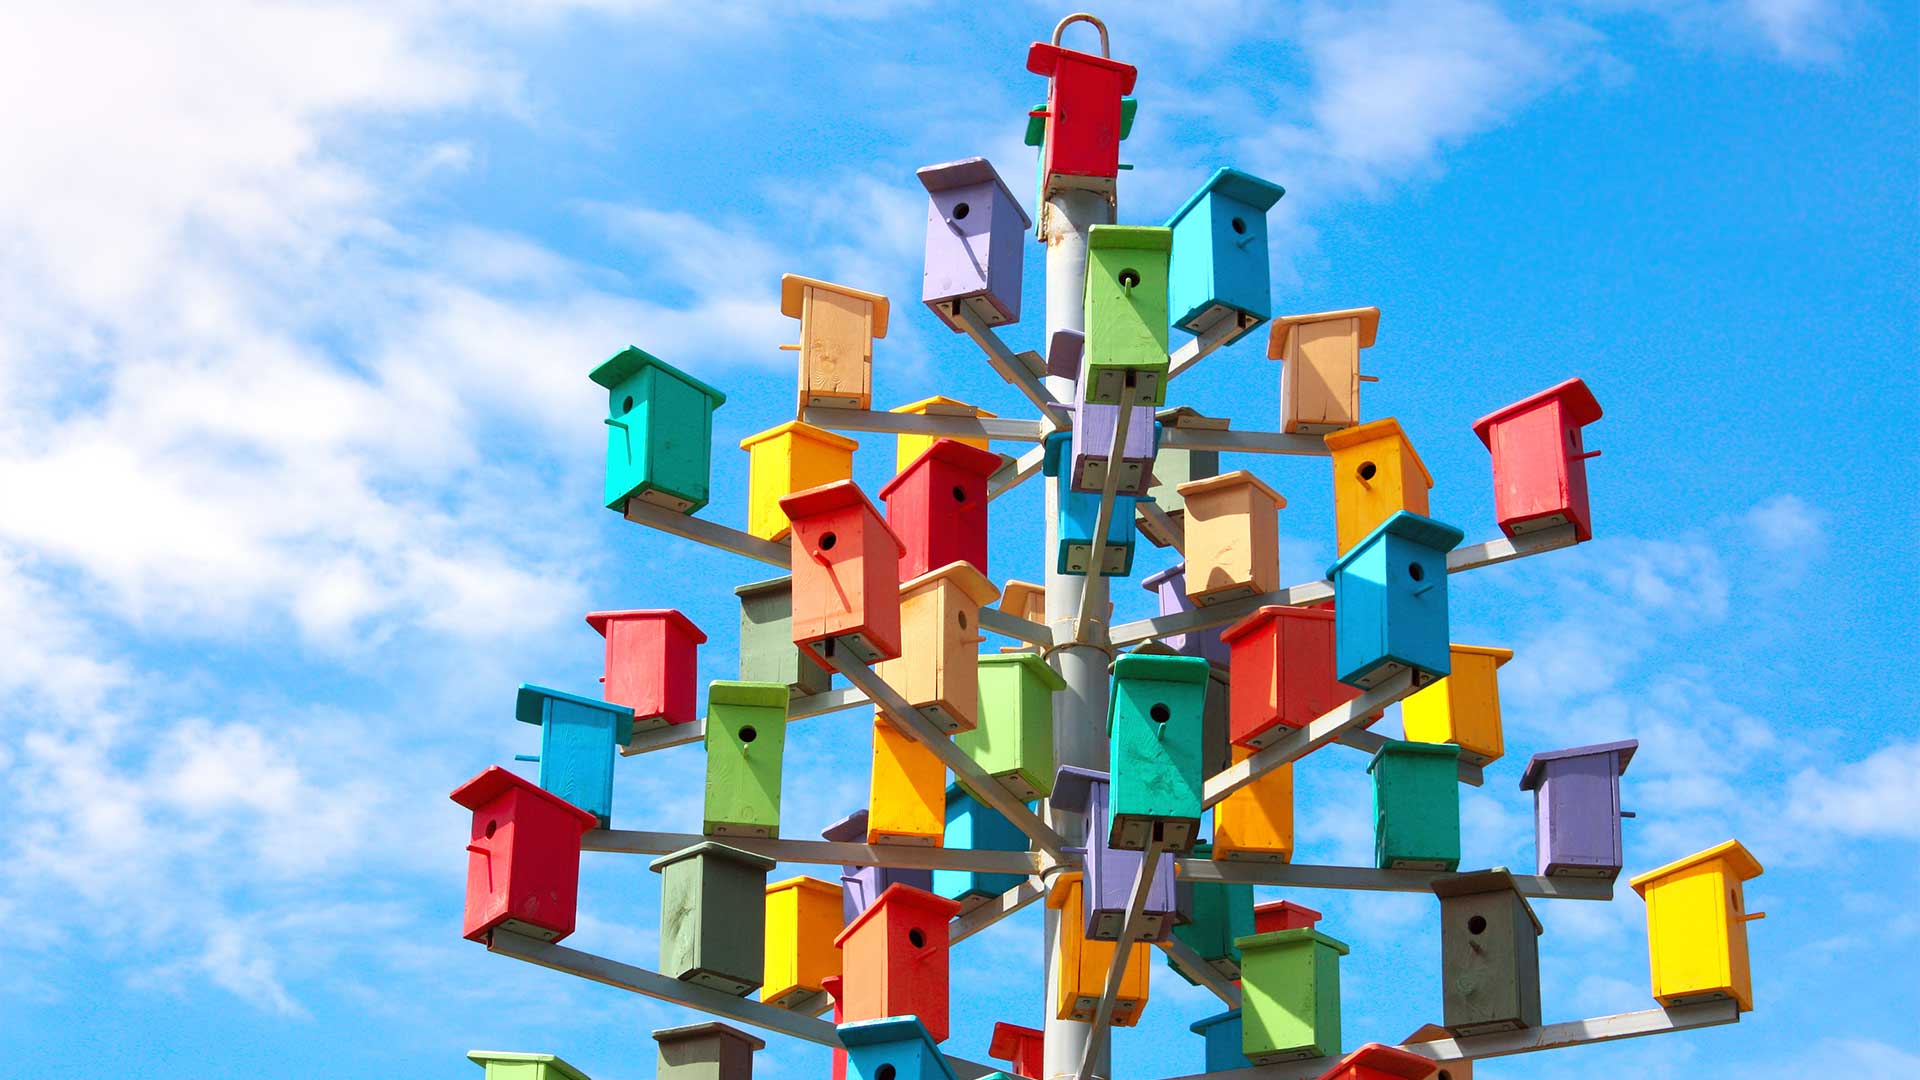 A tree of colourful bird boxes